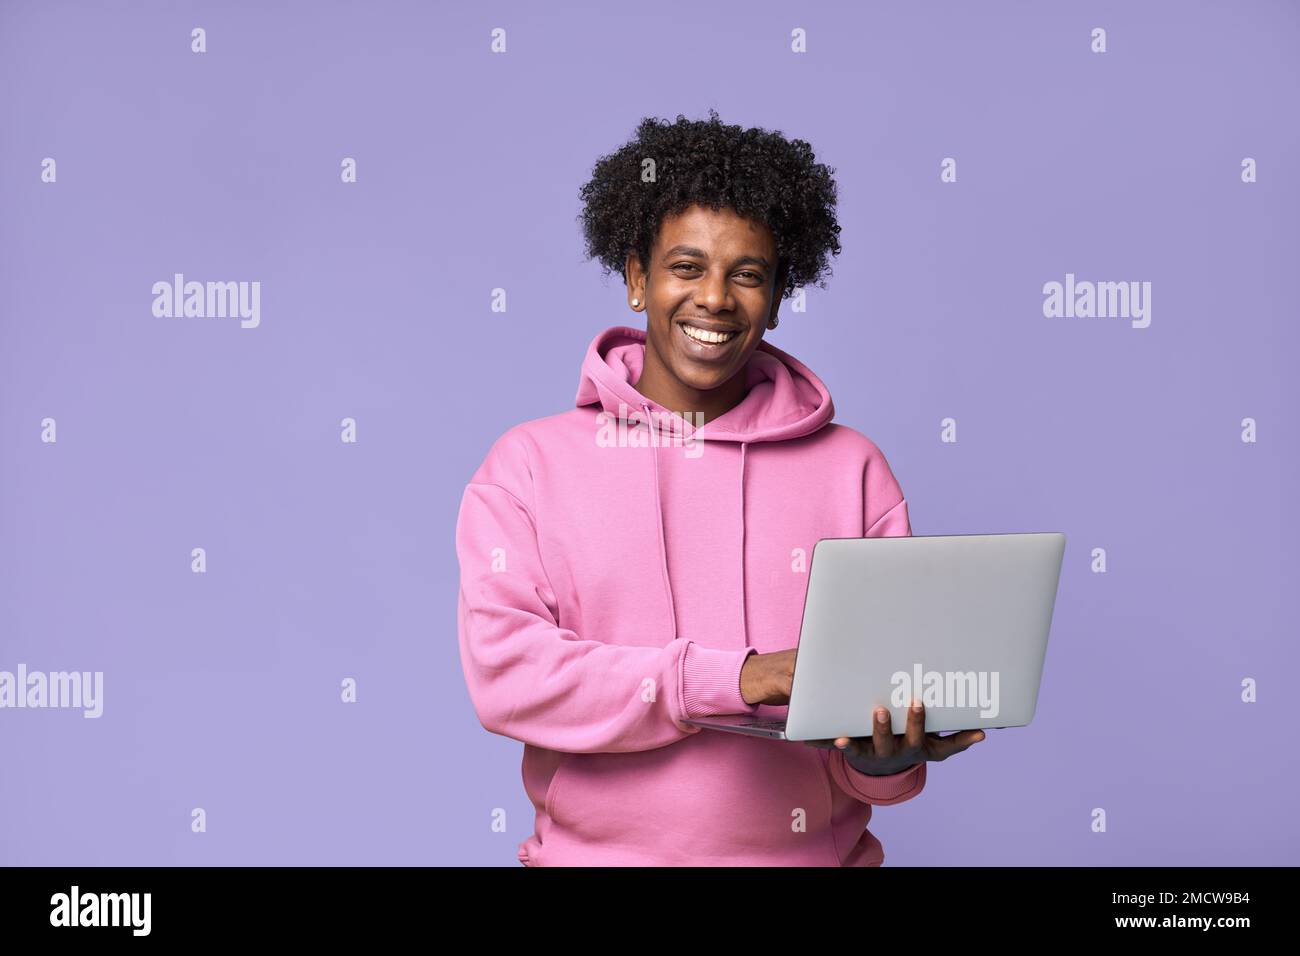 Happy African teenager holding using laptop isolated on purple background. Stock Photo